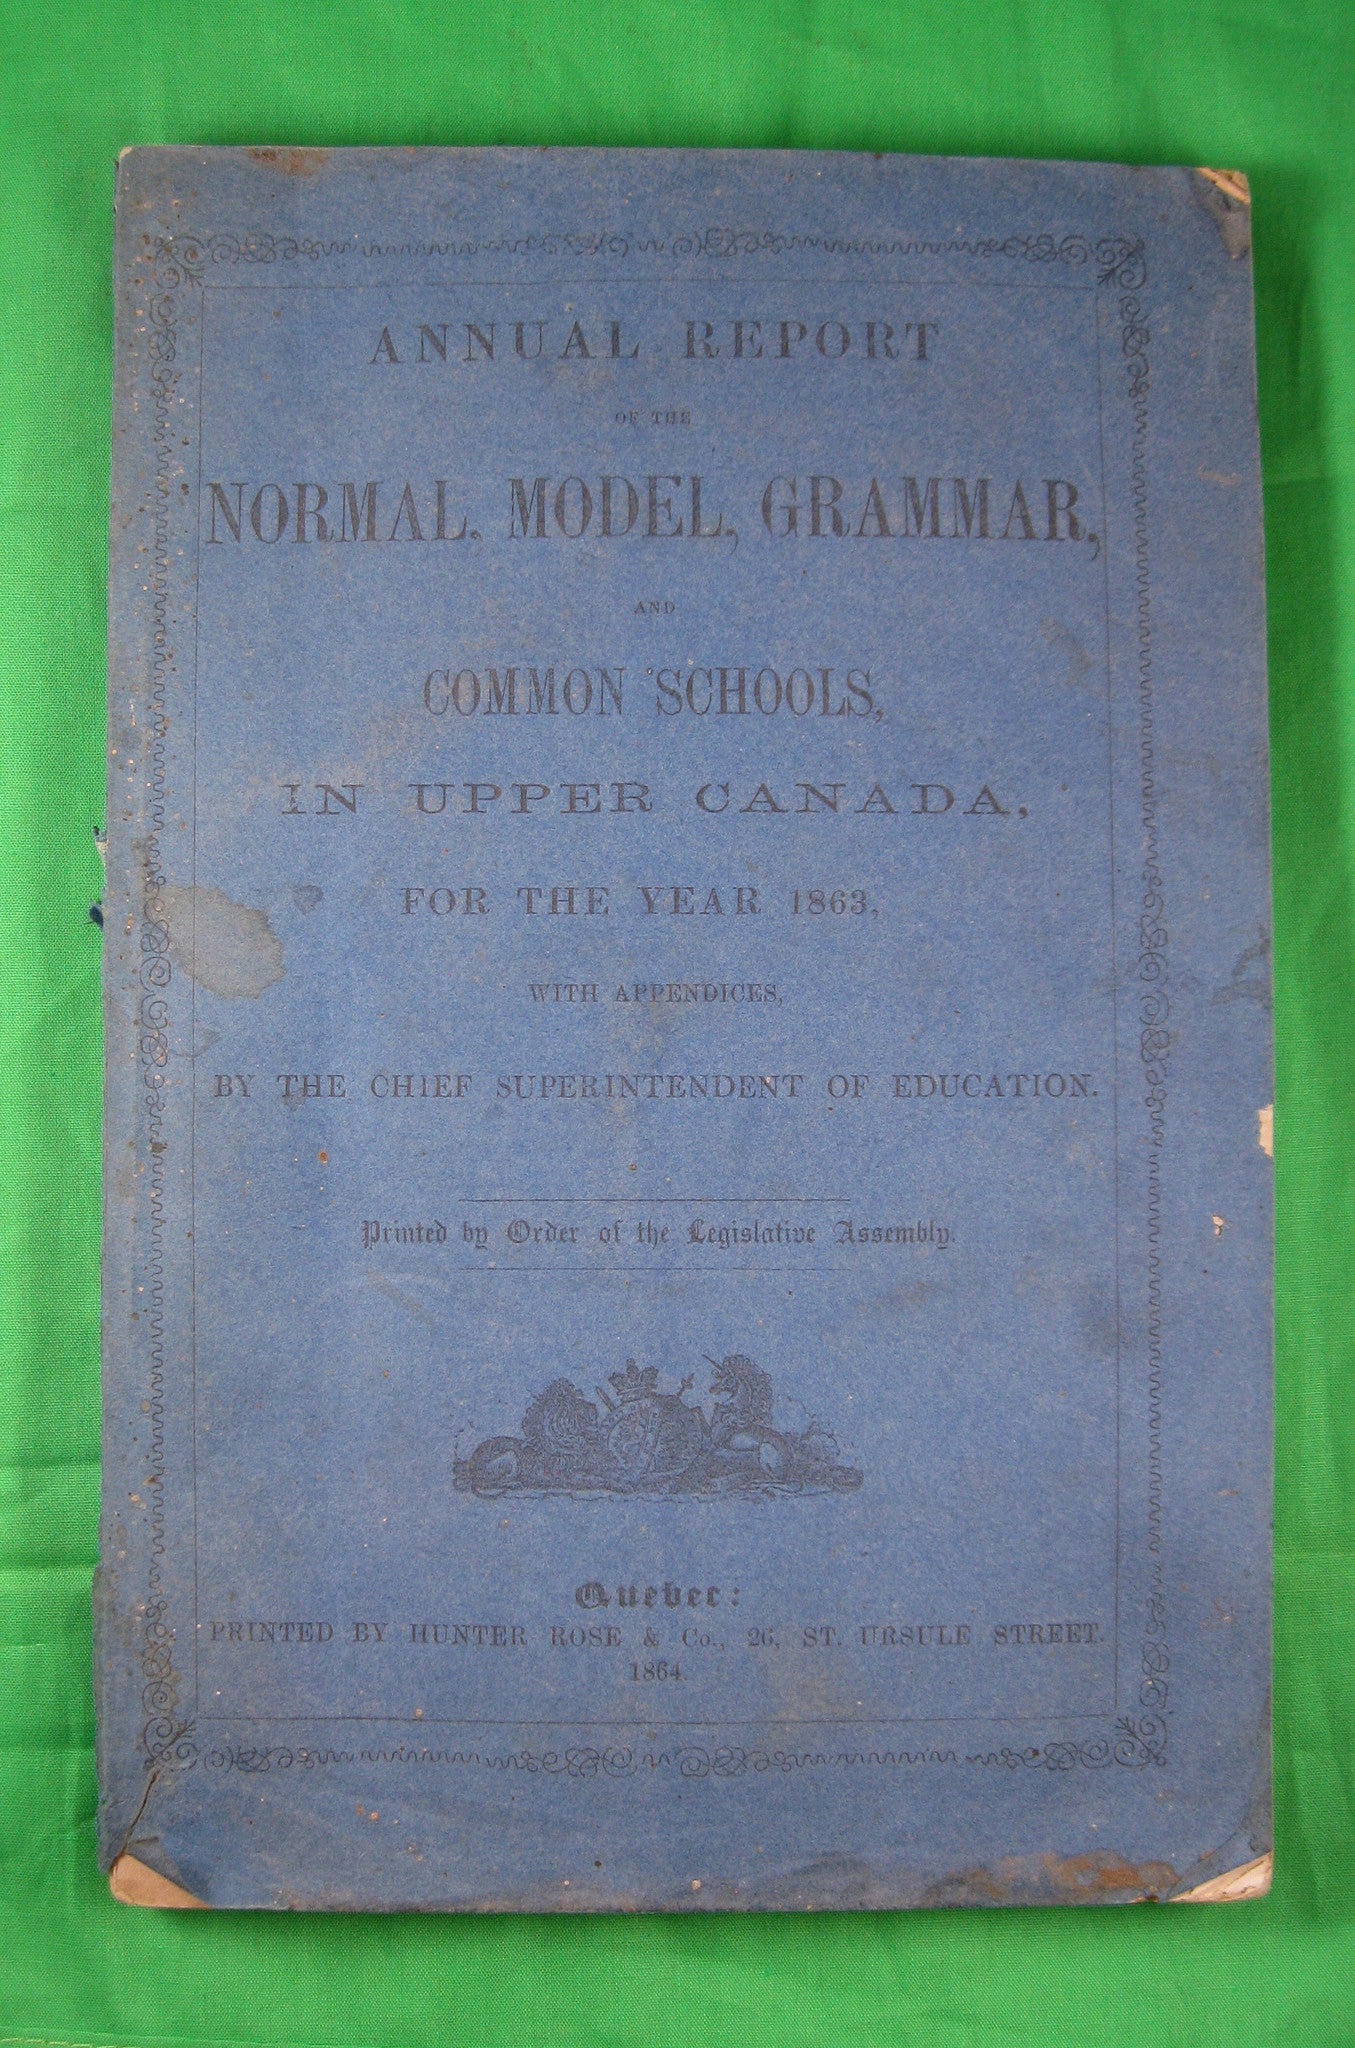 Annual report of the Normal Model Grammar and Common Schools in Upper Canada for the year 1863 (Ryerson)